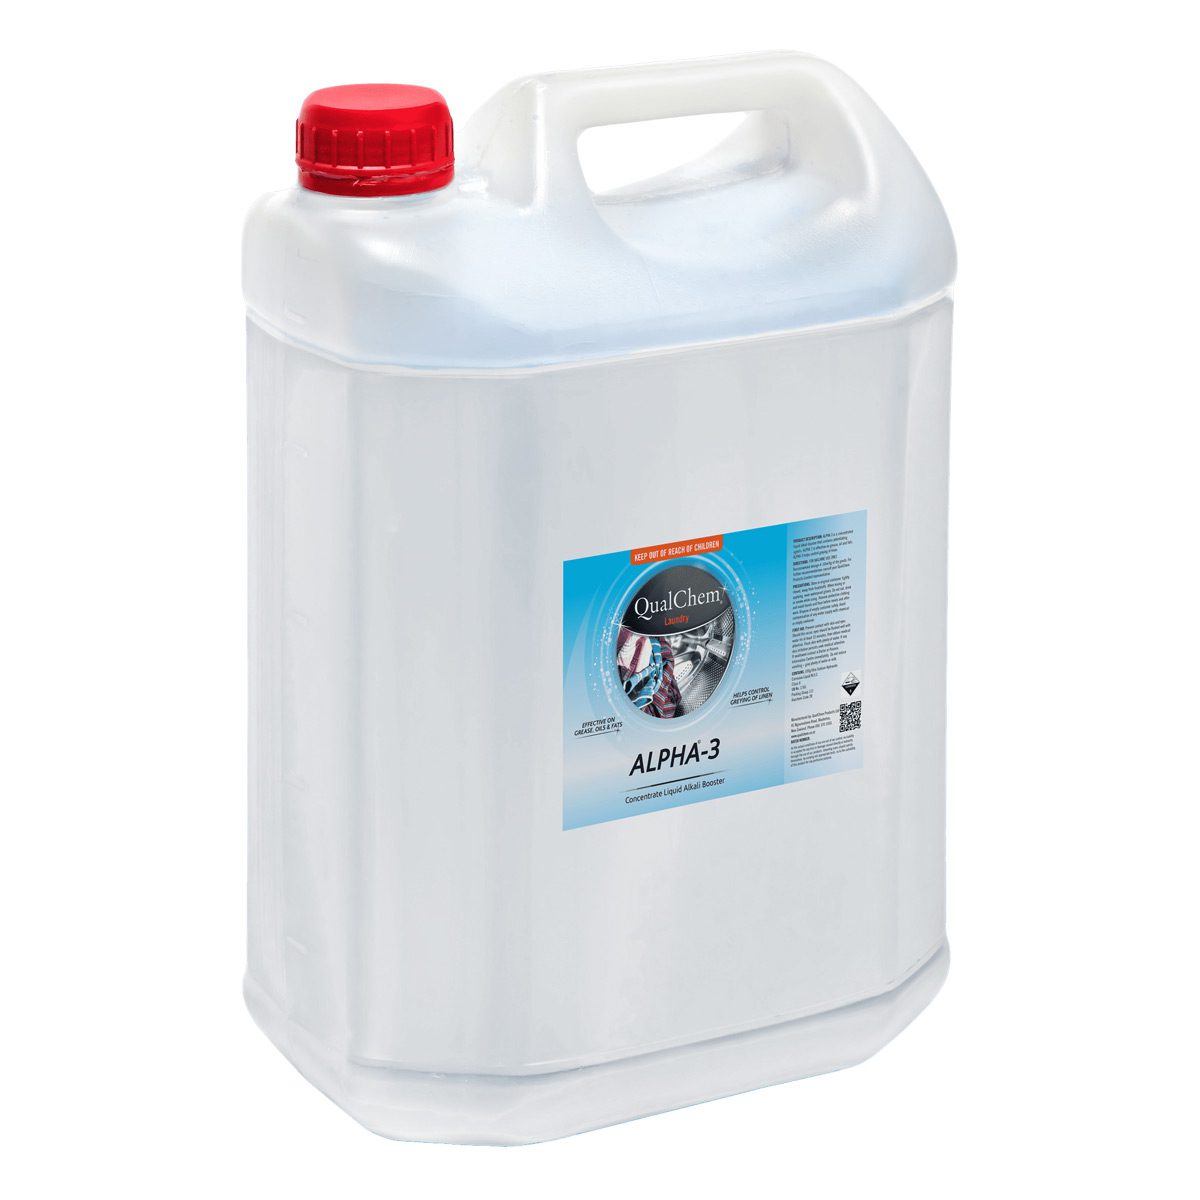 cleaning-products-laundry-qualchem-alpha-3-alkali-booster-10L-litre-heavy-duty-liquid-alkali-booster-formulated-in-conjunction-ALPHA-2-effective-grease-oils-fats-vjs-distributors-AL310